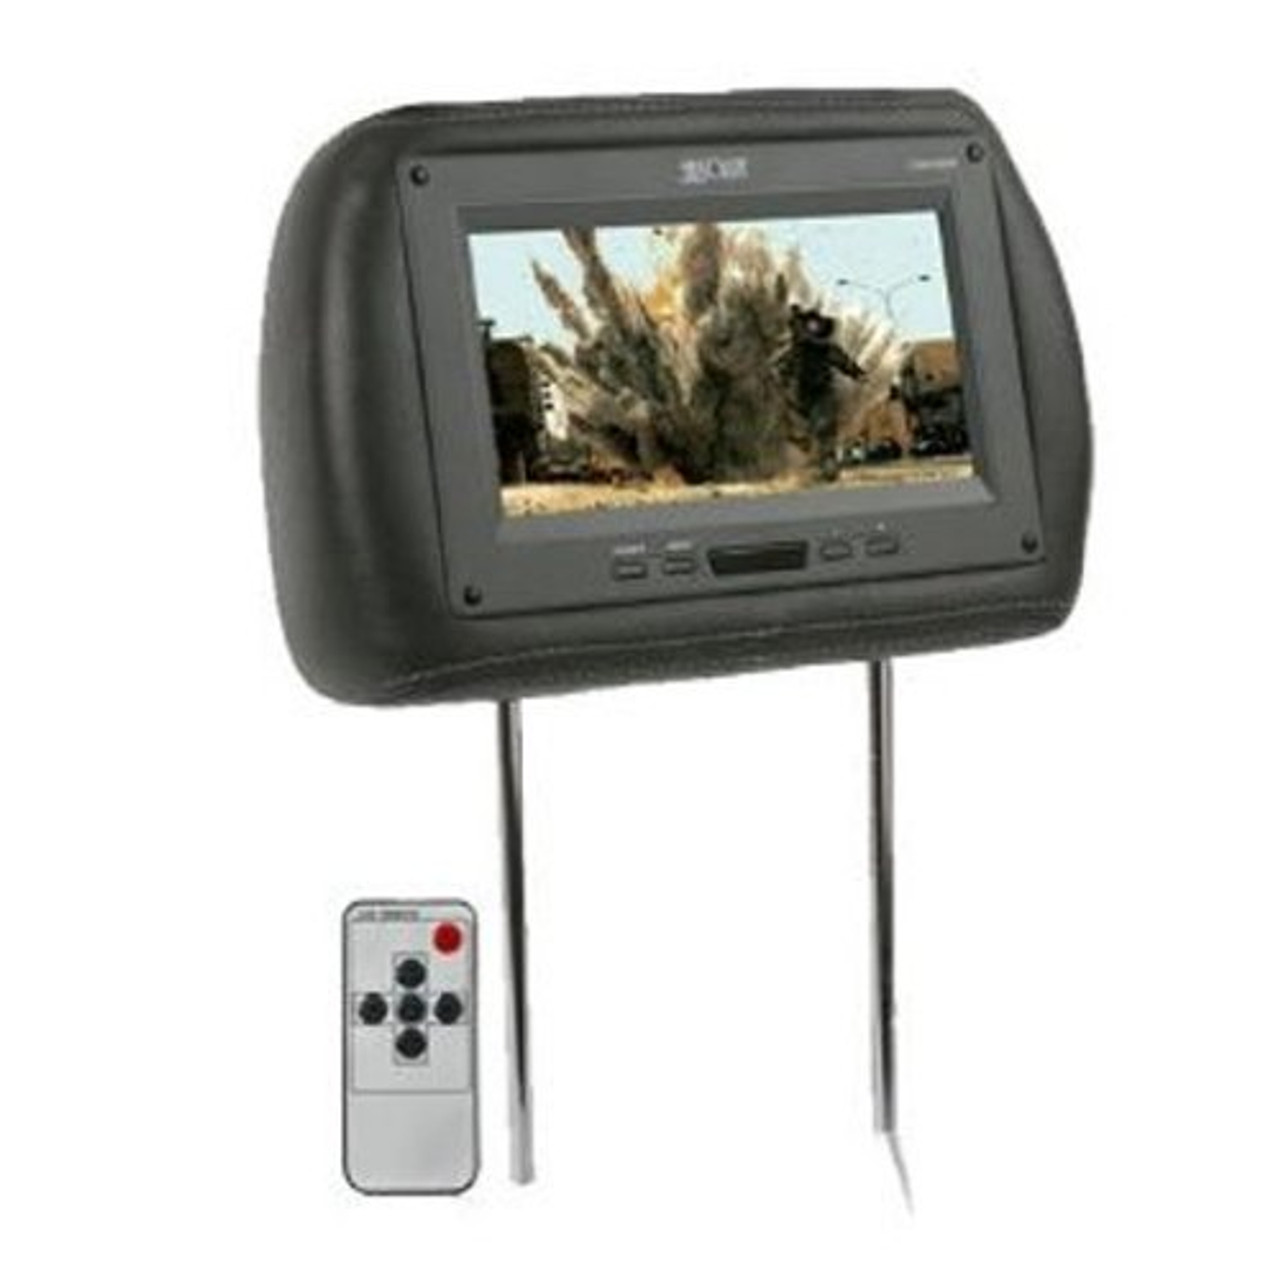 ABSOLUTE COM1210IRG 12-INCH TFT LCD MONITOR LOADED IN GREY LEATHER HEADREST WITH BUILT-IN IR TRANSMITTER